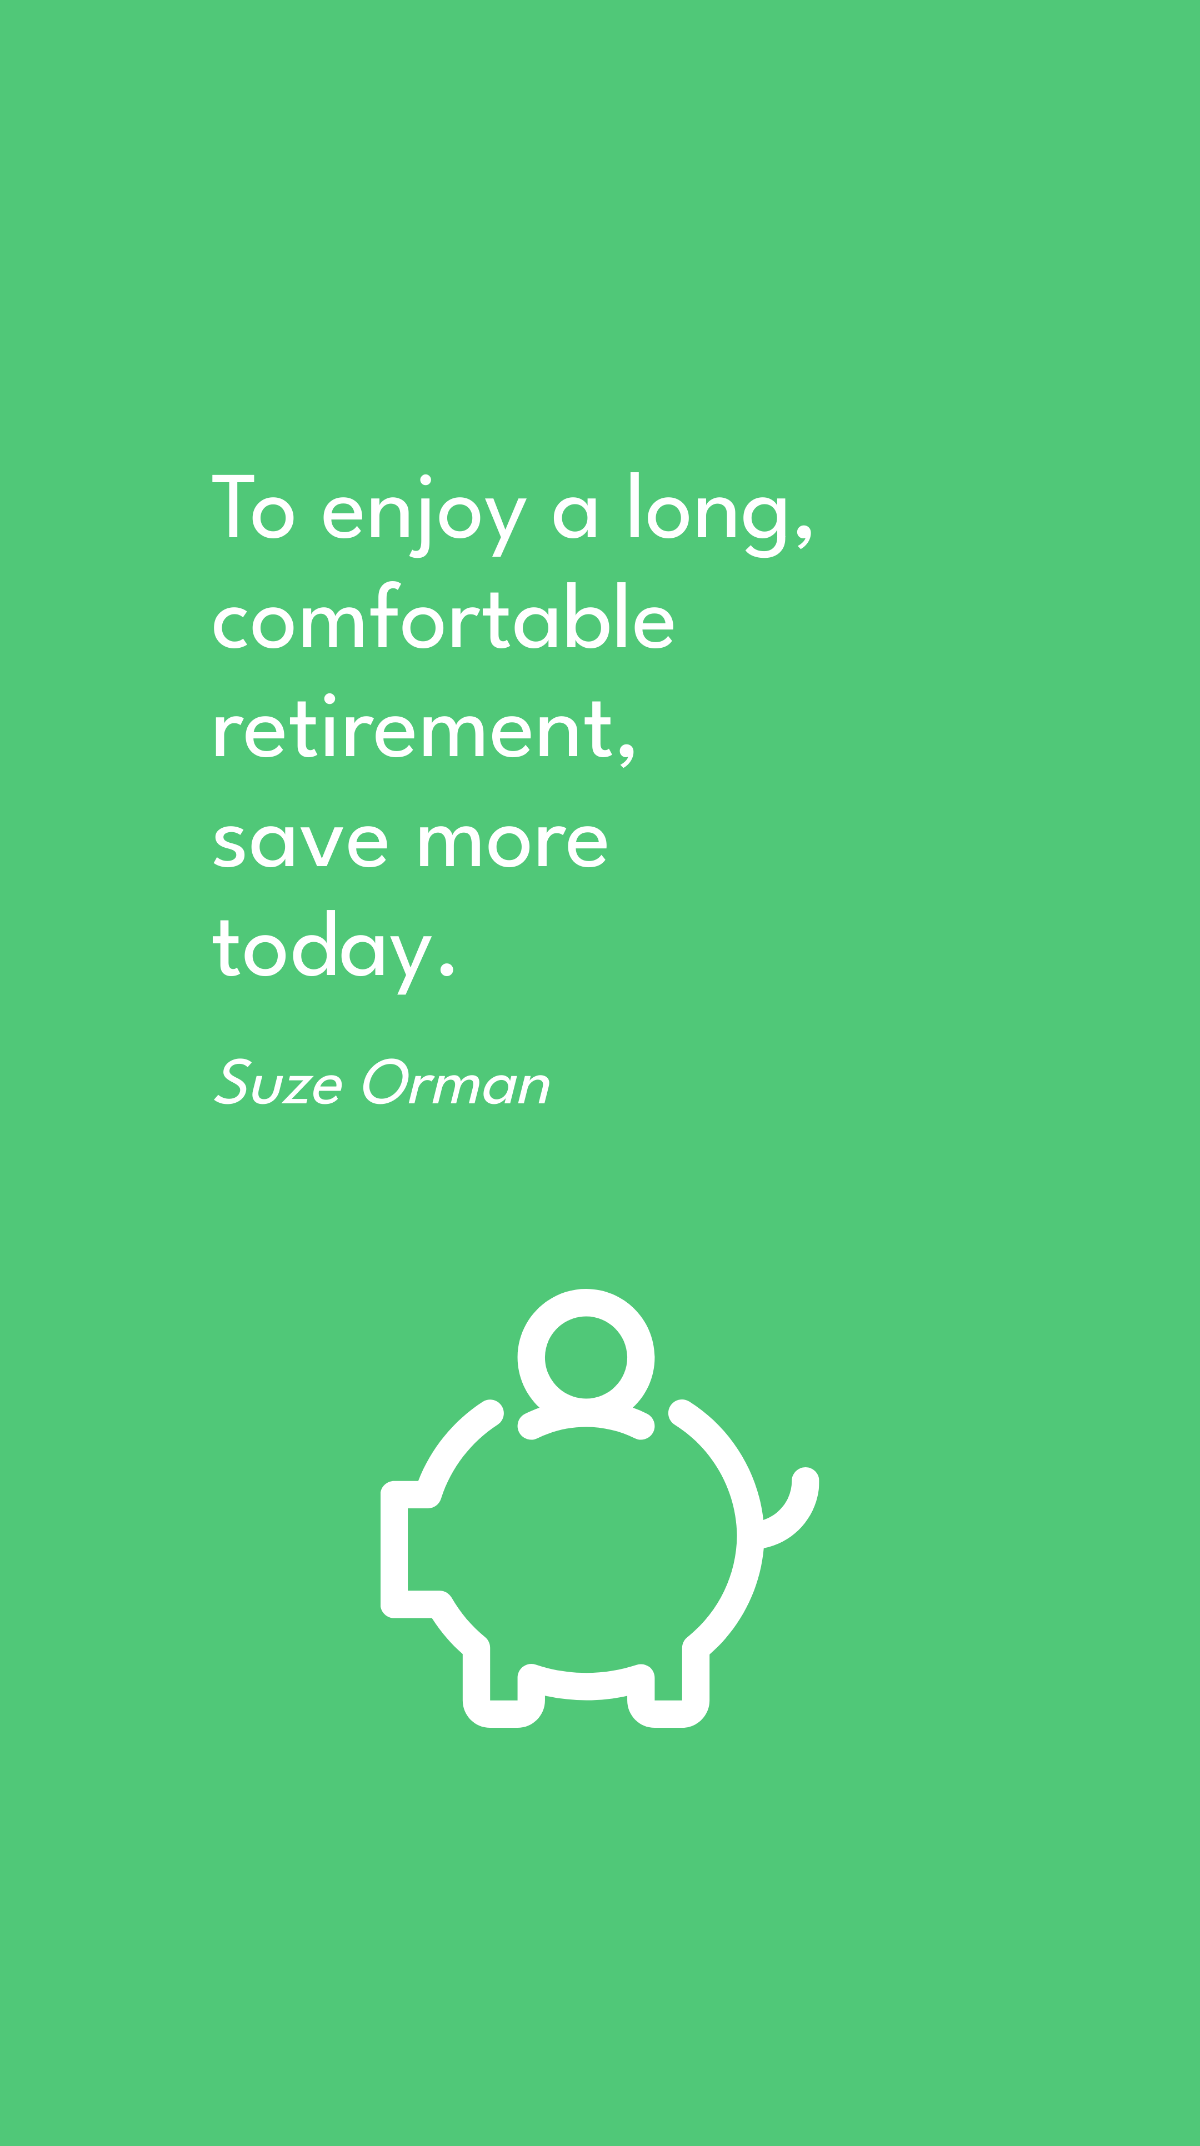 Suze Orman - To enjoy a long, comfortable retirement, save more today. Template